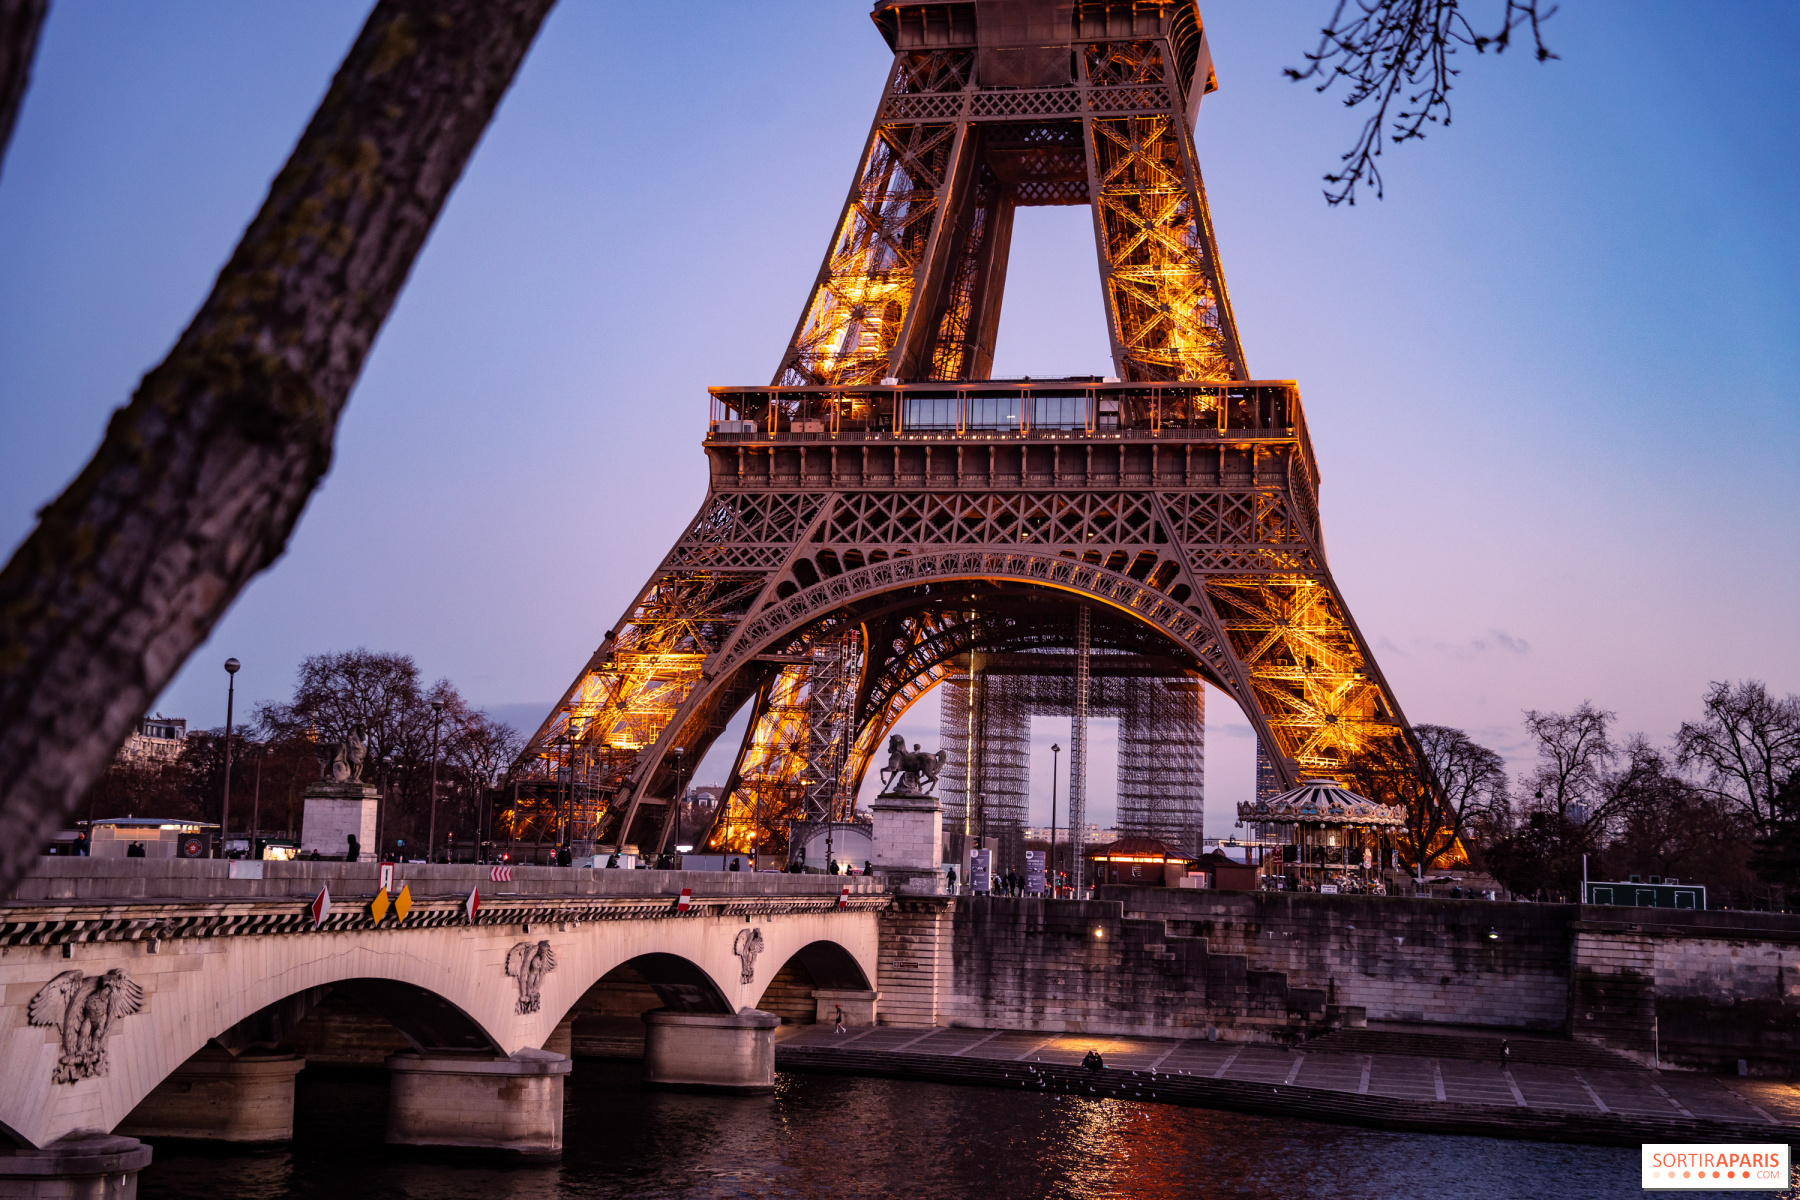 The Eiffel Tower freshens up ahead of the 2024 Olympics